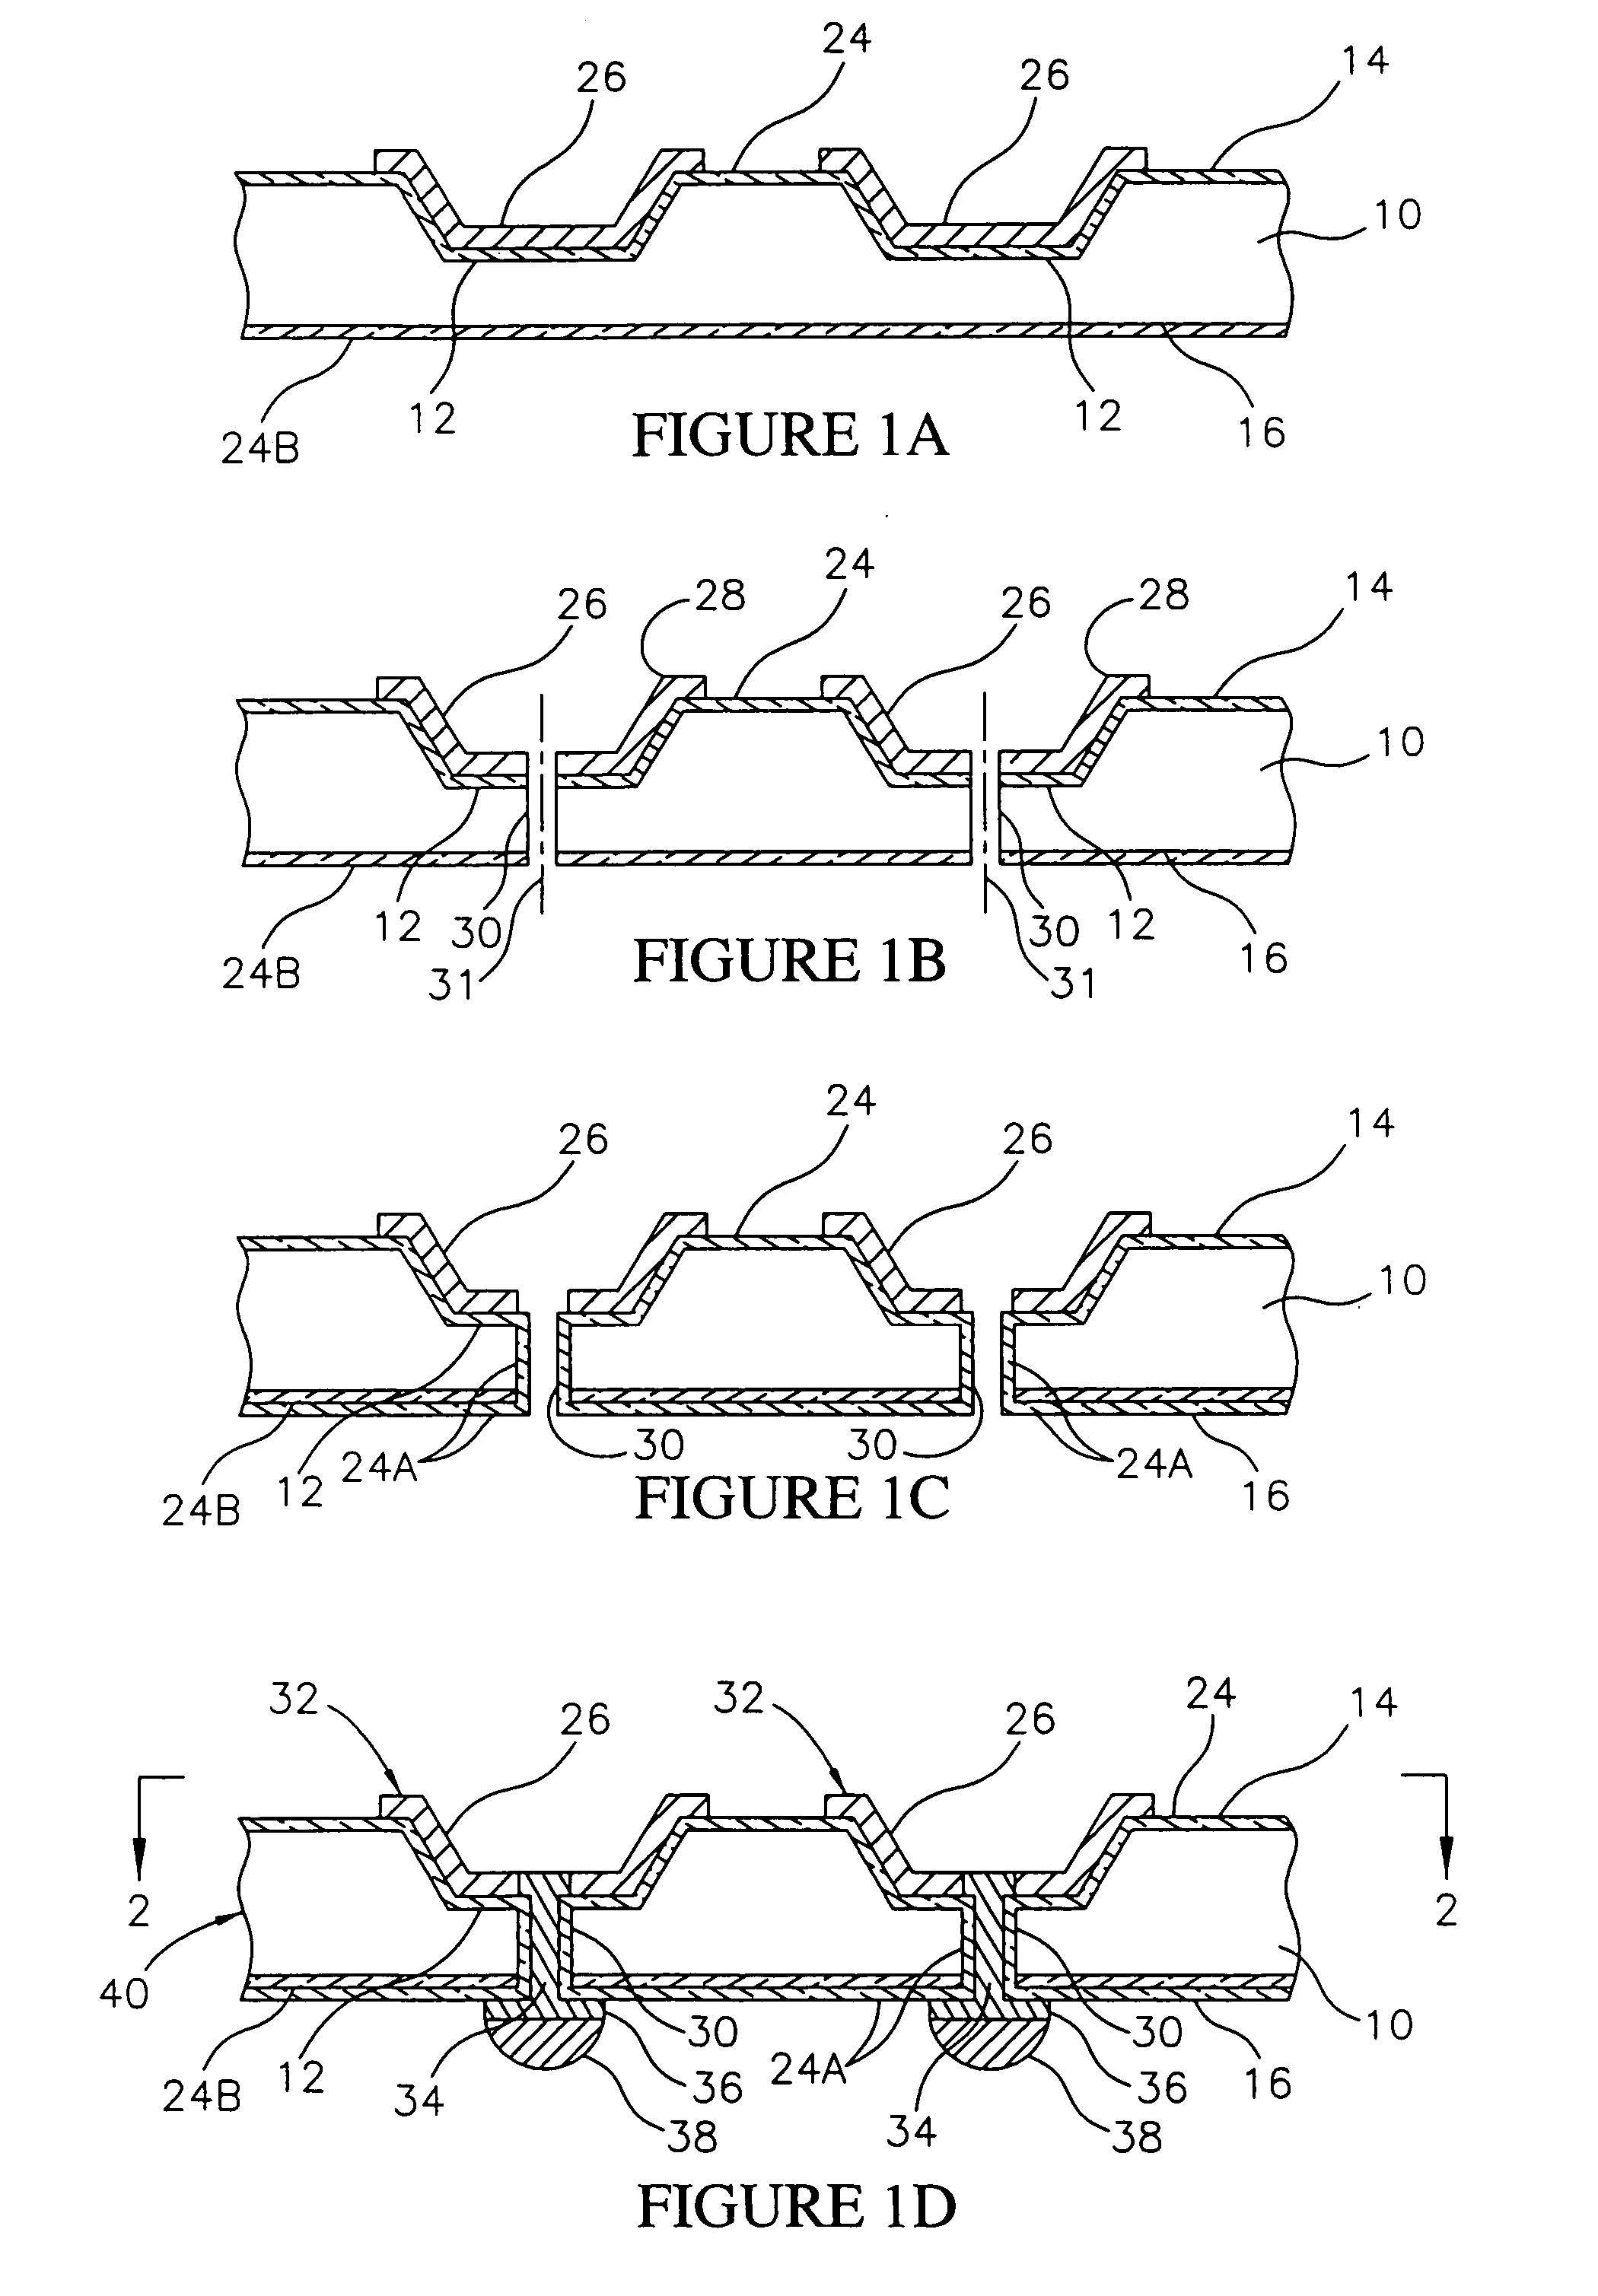 Method for fabricating semiconductor components by forming conductive members using solder